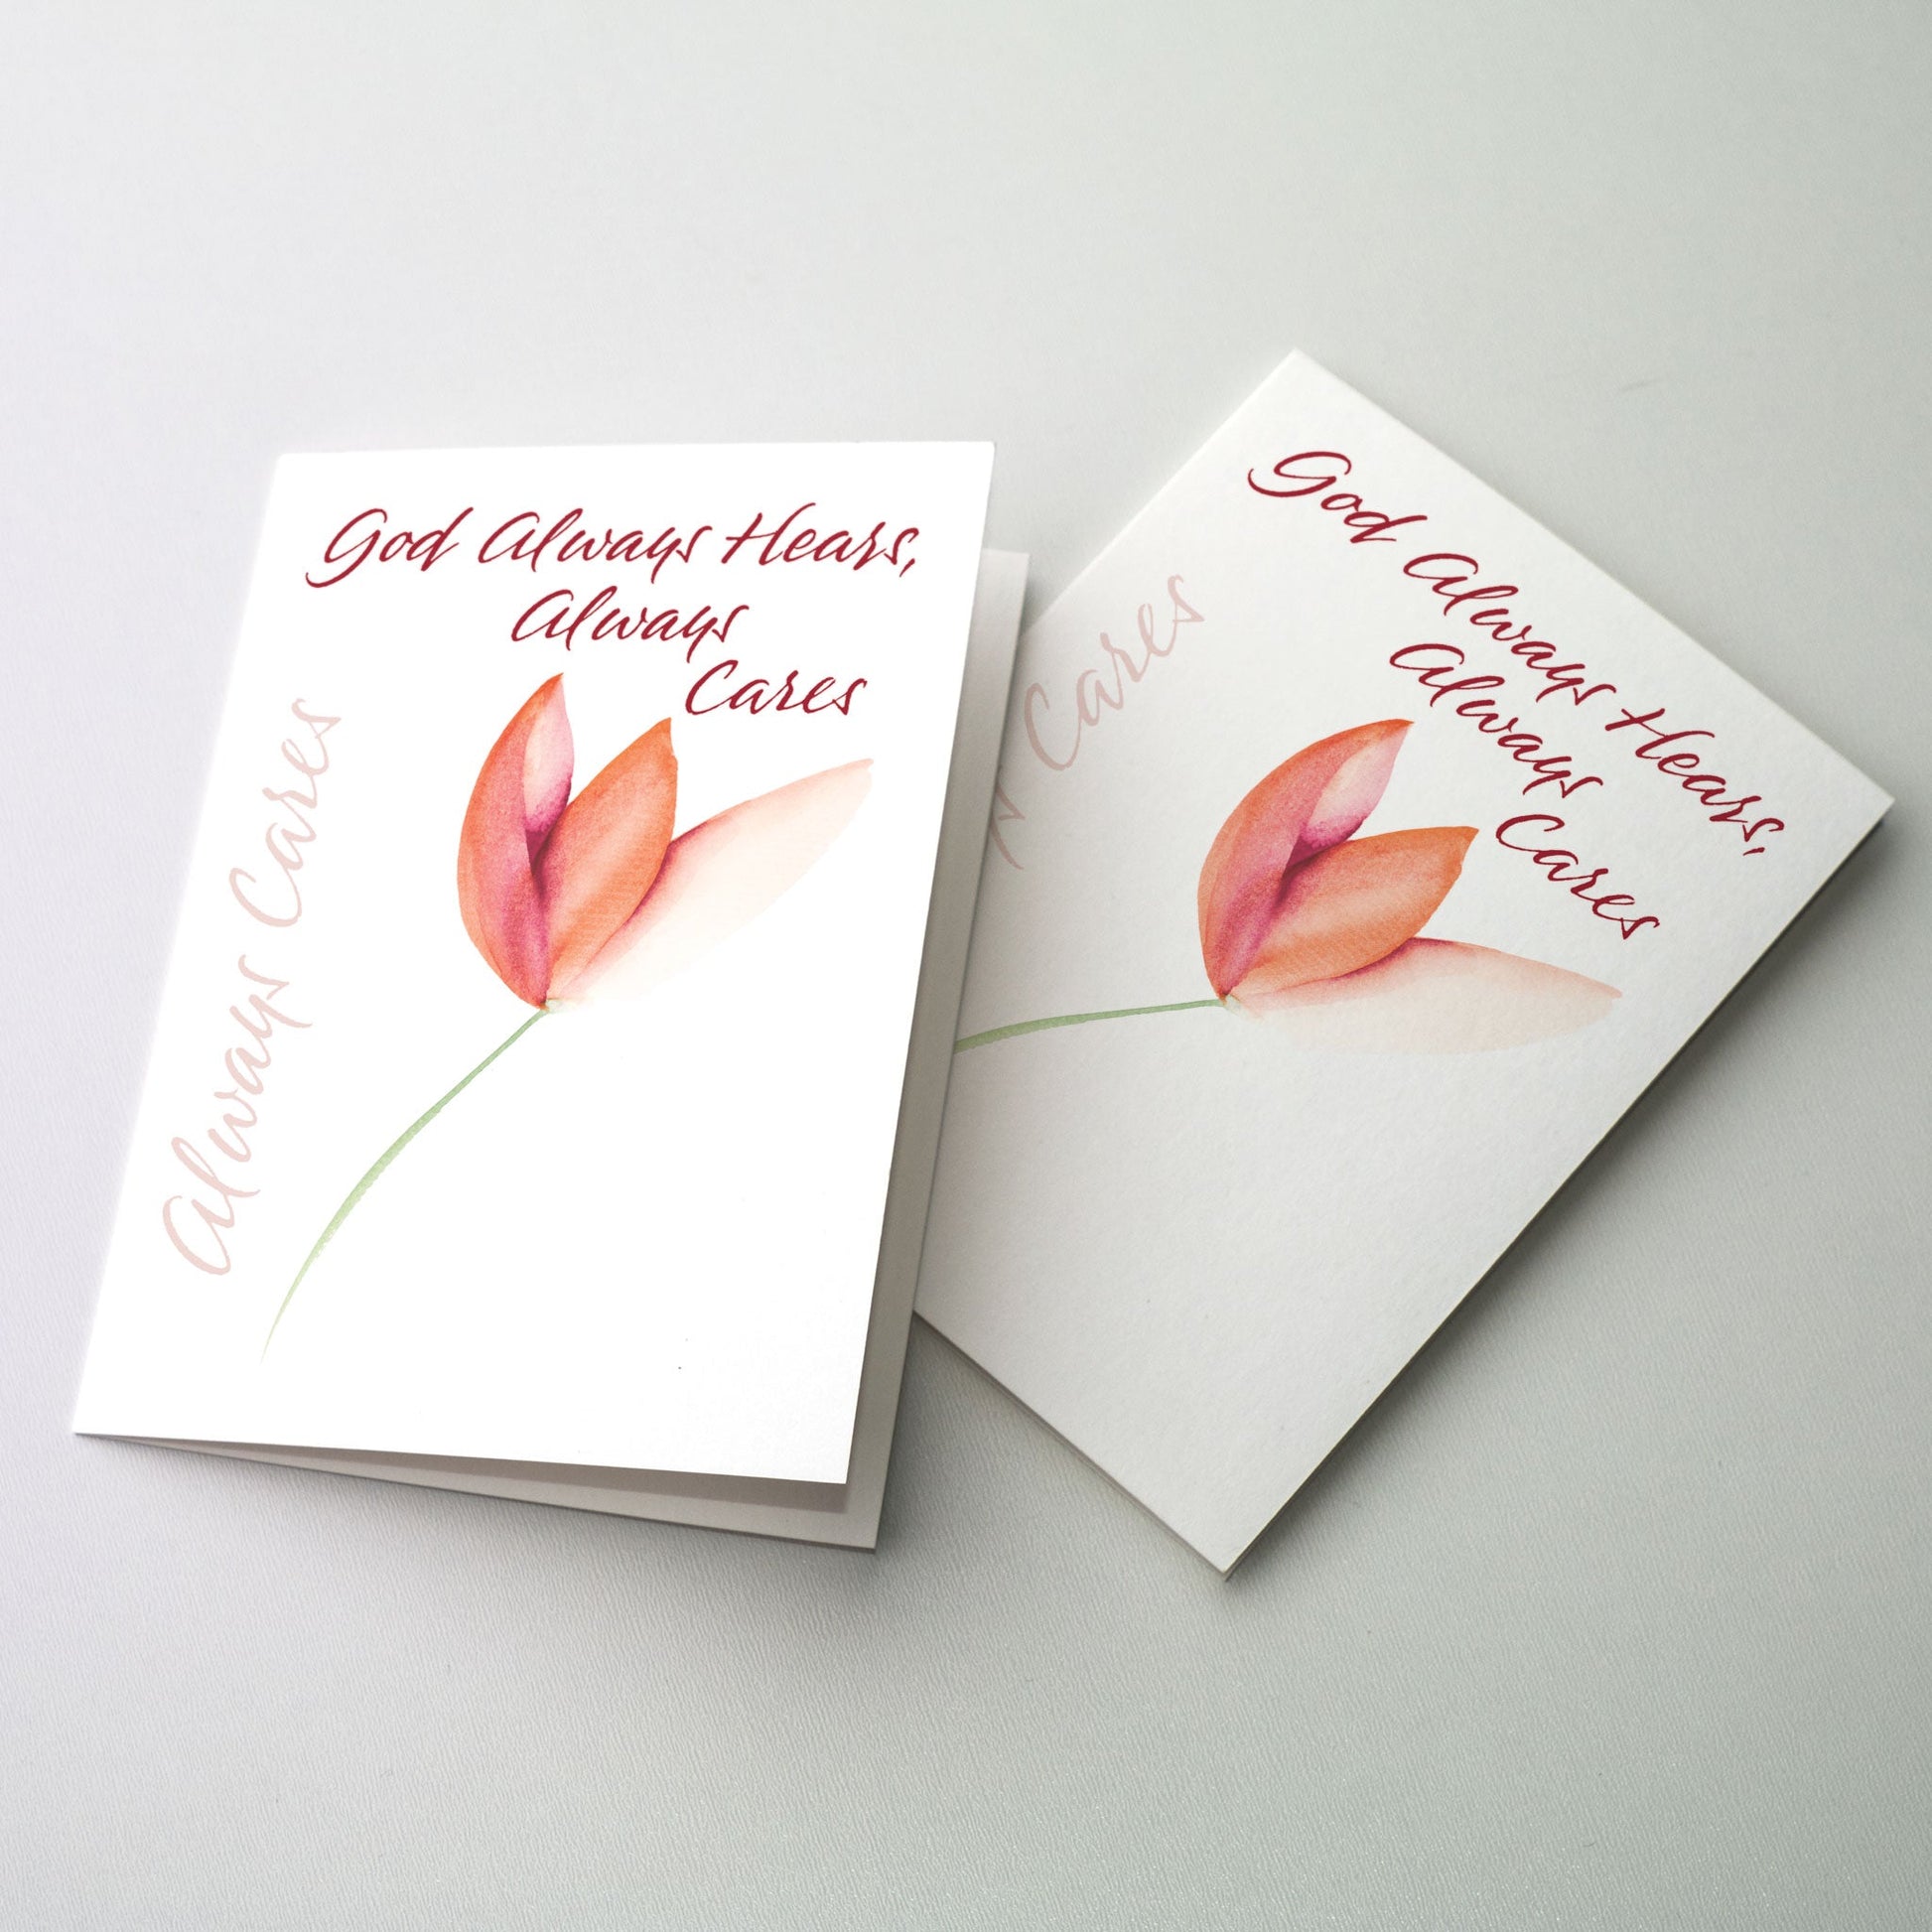 Express your thoughts of concern and prayer in calligraphy accented by a coral colored flower. The cards measure 5&quot; x 7&quot;. Printed on recycled paper.